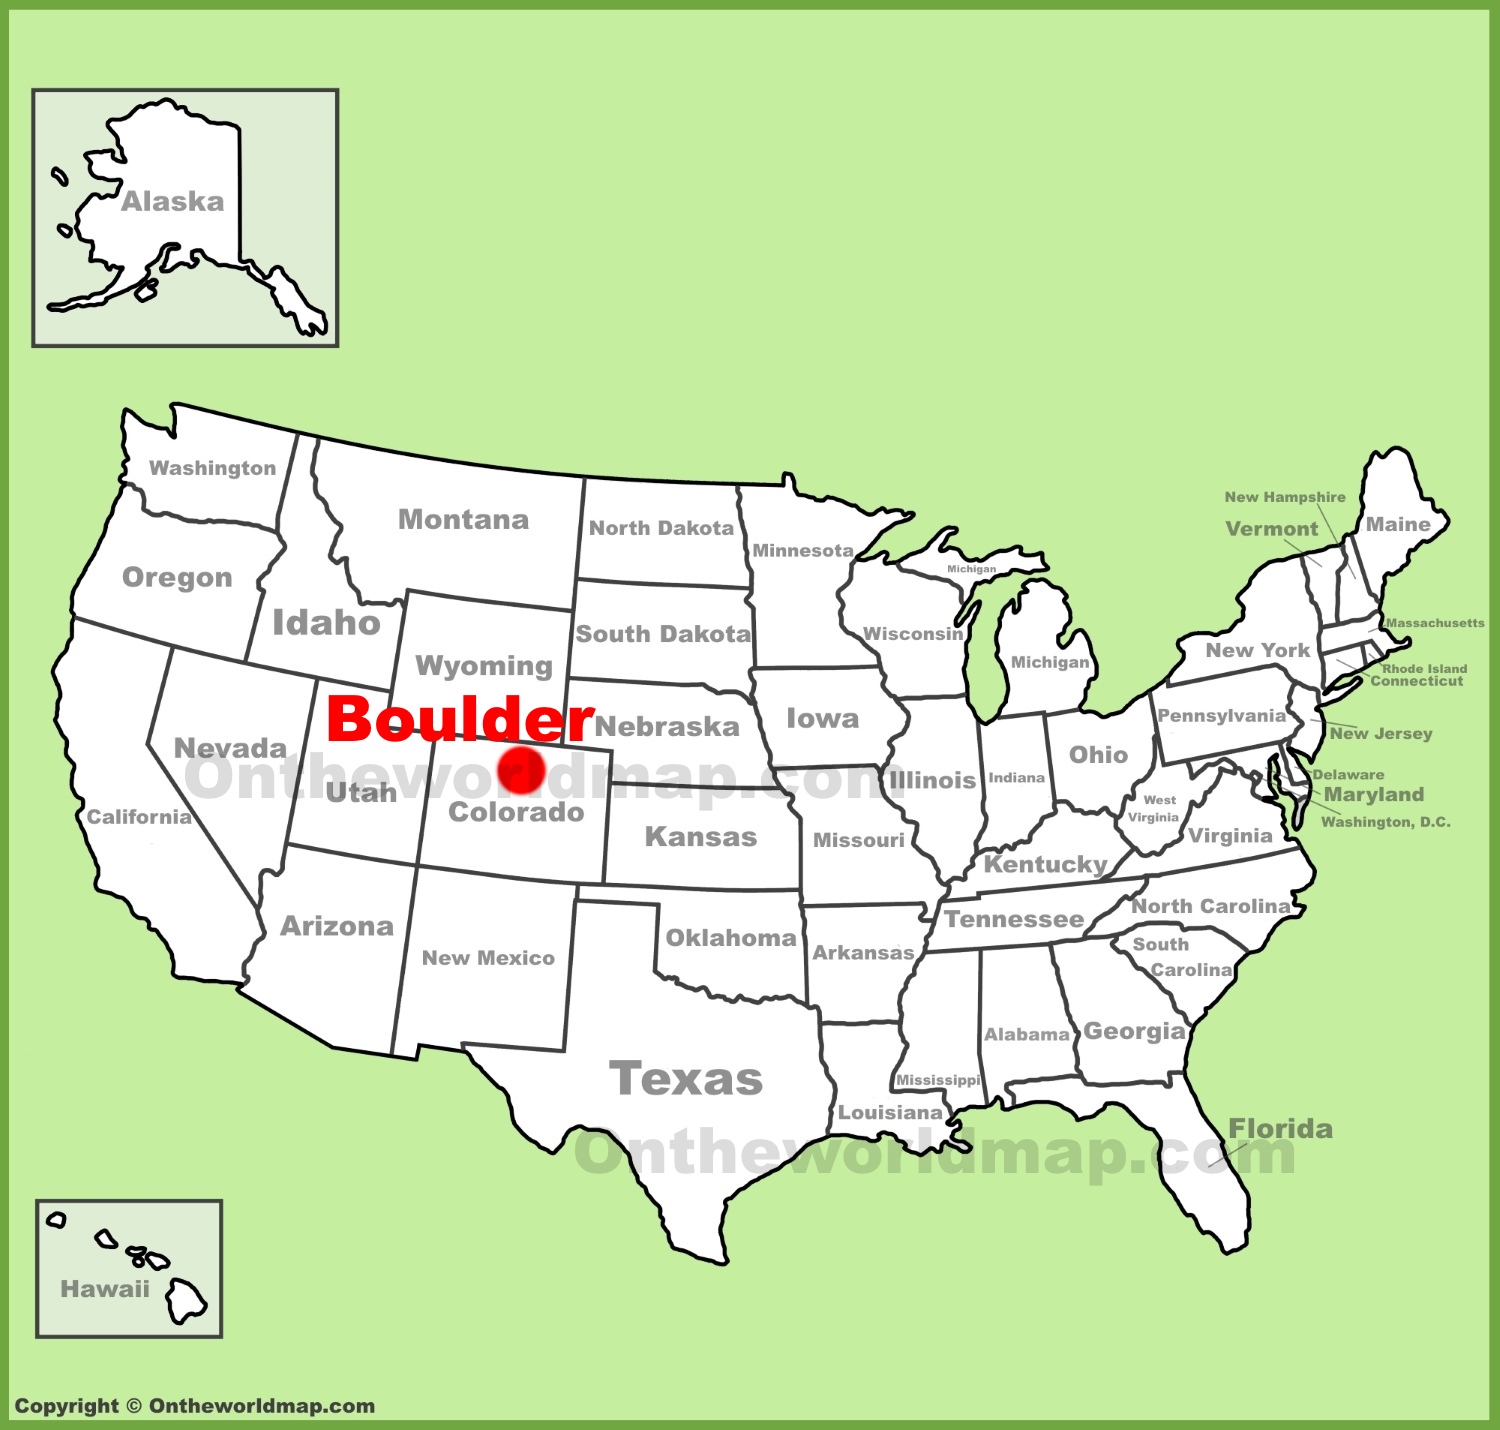 Boulder Location On The Us Map 